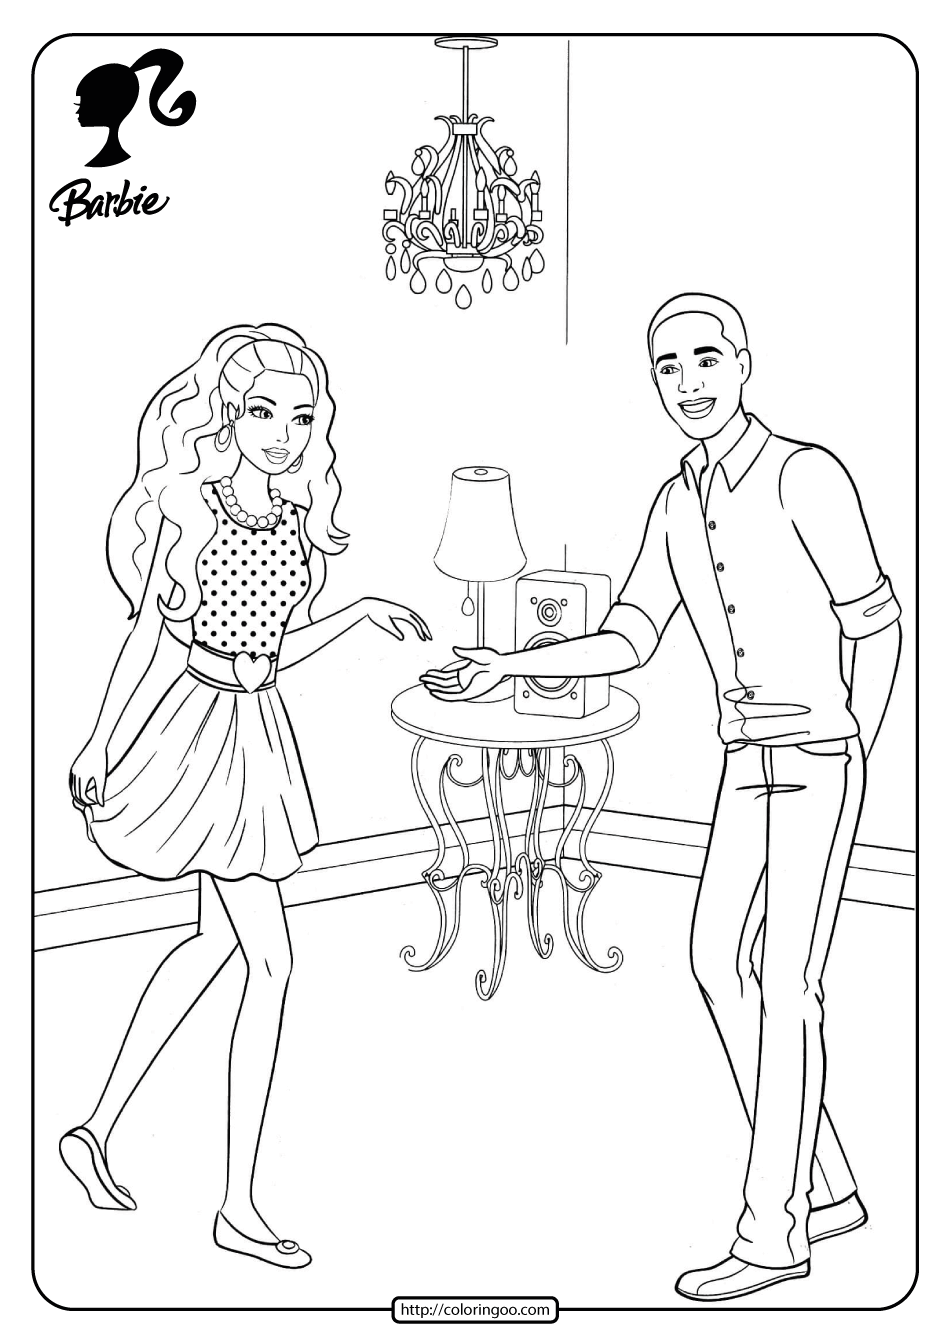 Barbie Dancing with Steven Coloring Pages 21